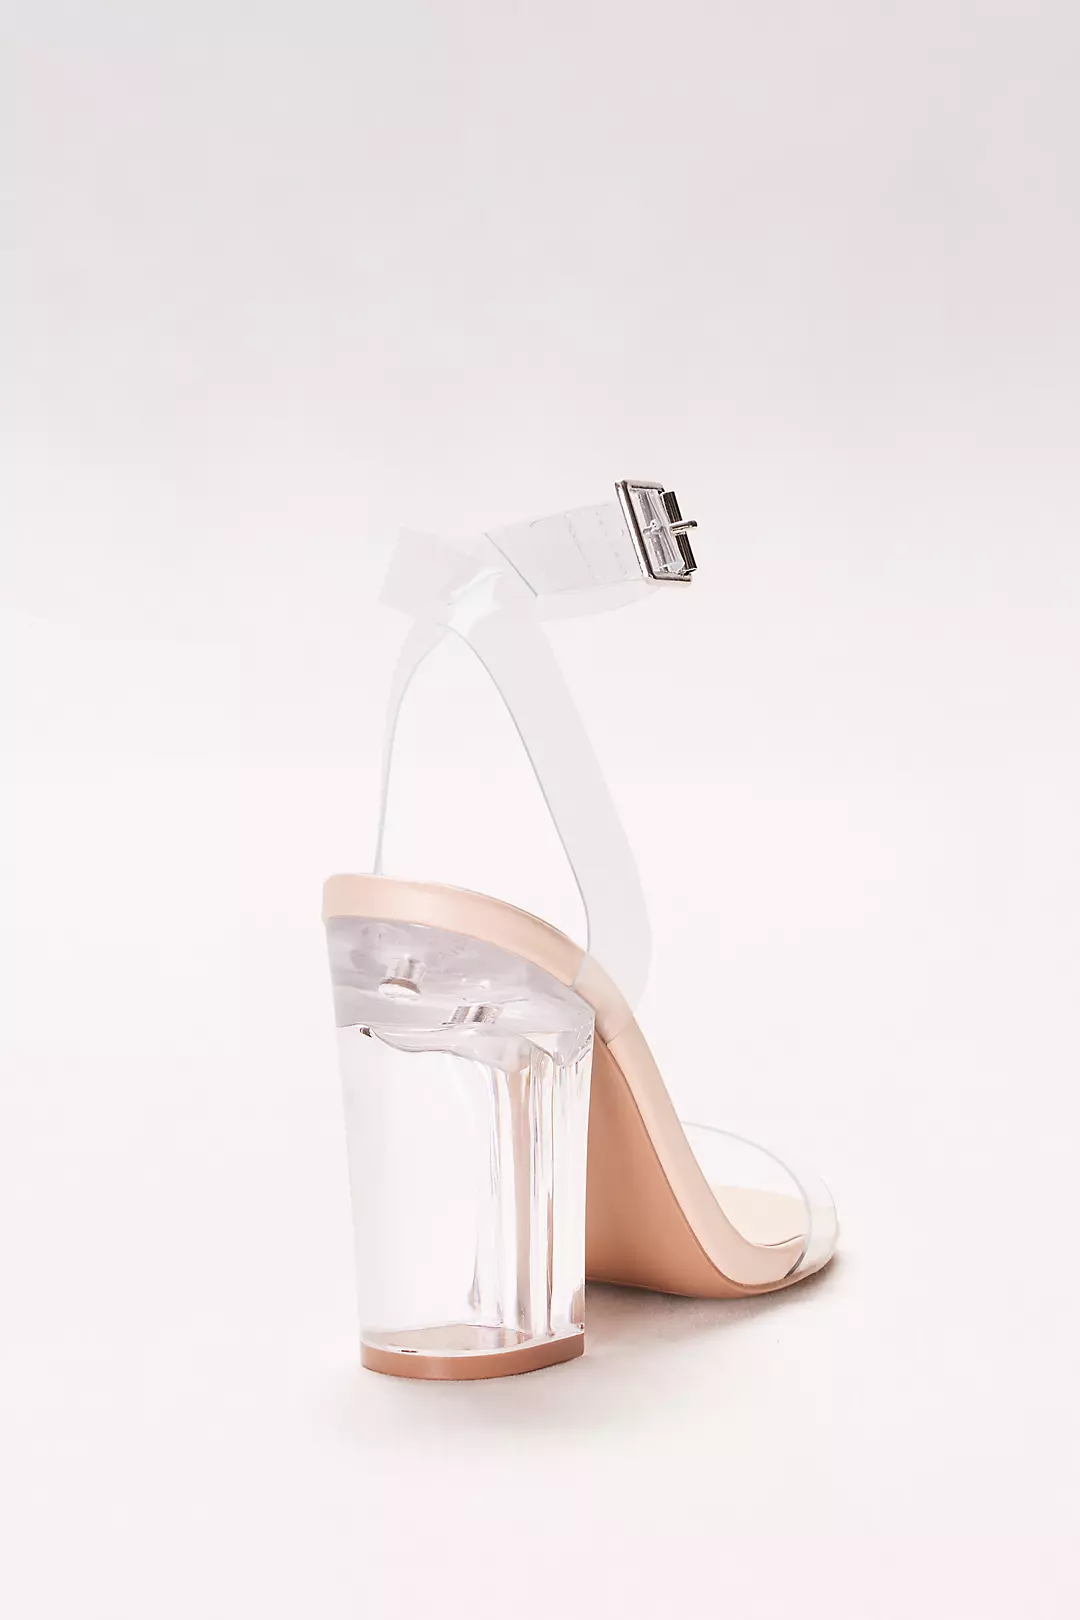 Strappy Lucite Heels Image 2